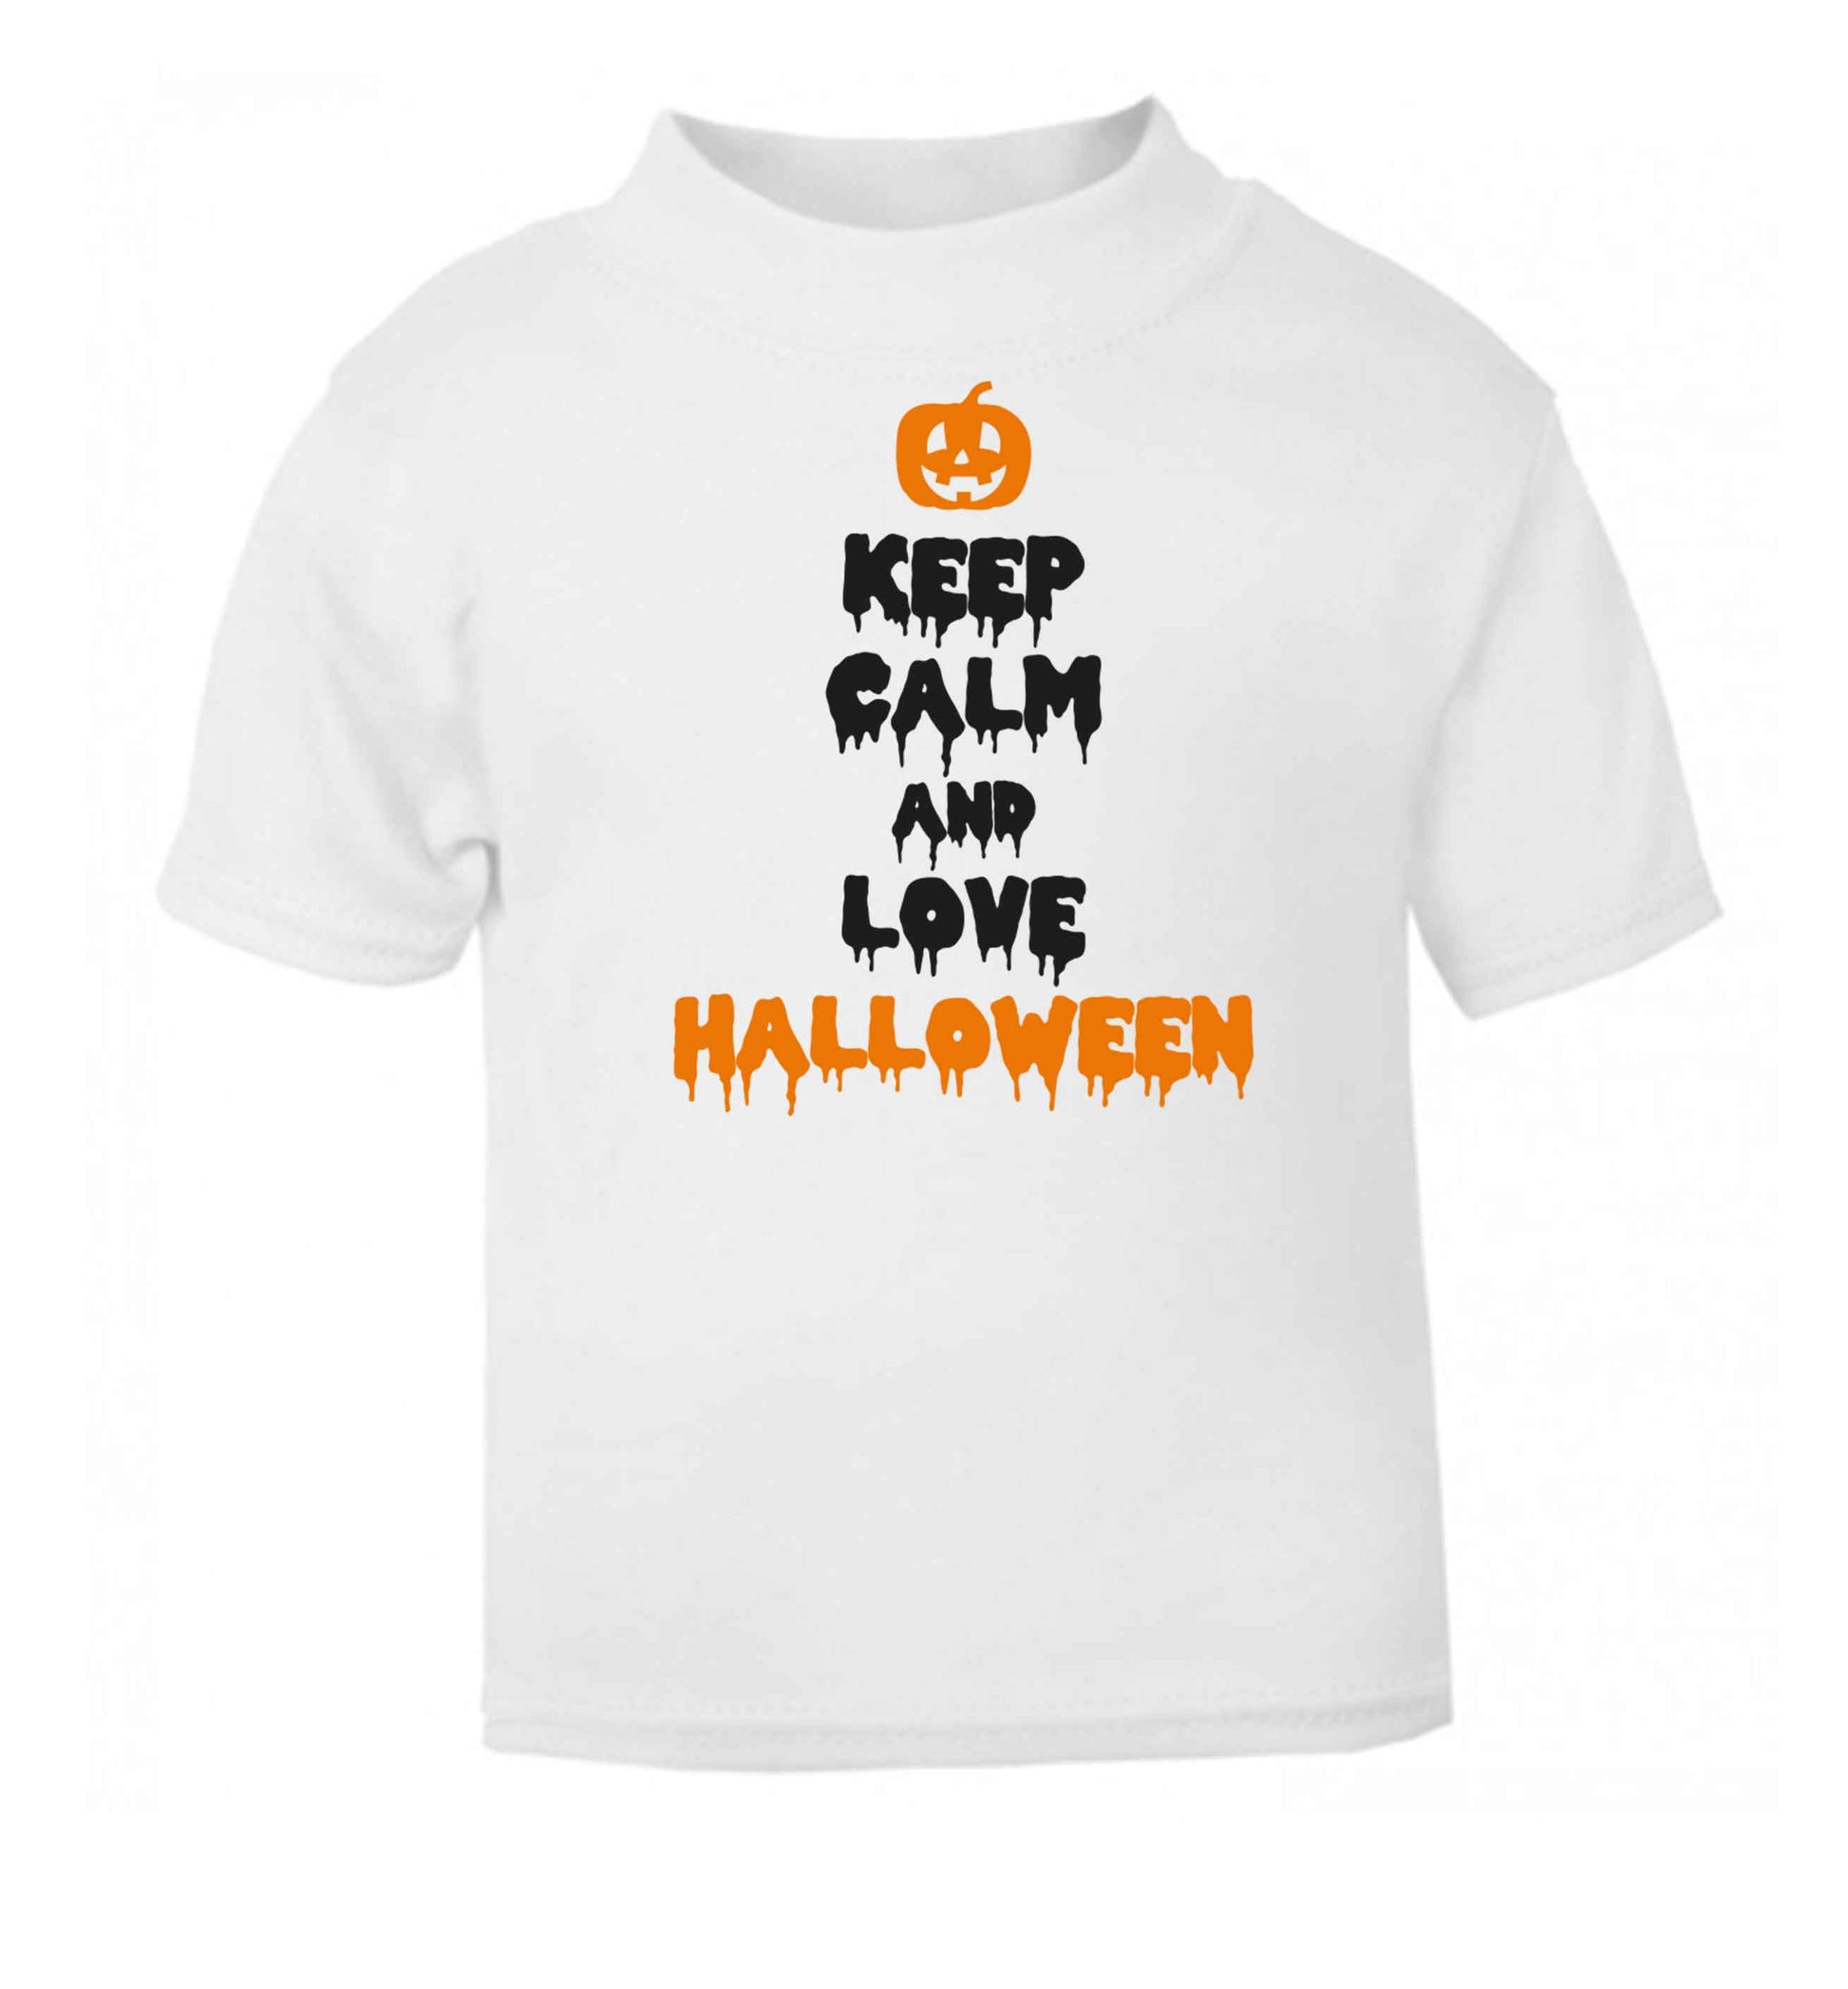 Keep calm and love halloween white baby toddler Tshirt 2 Years